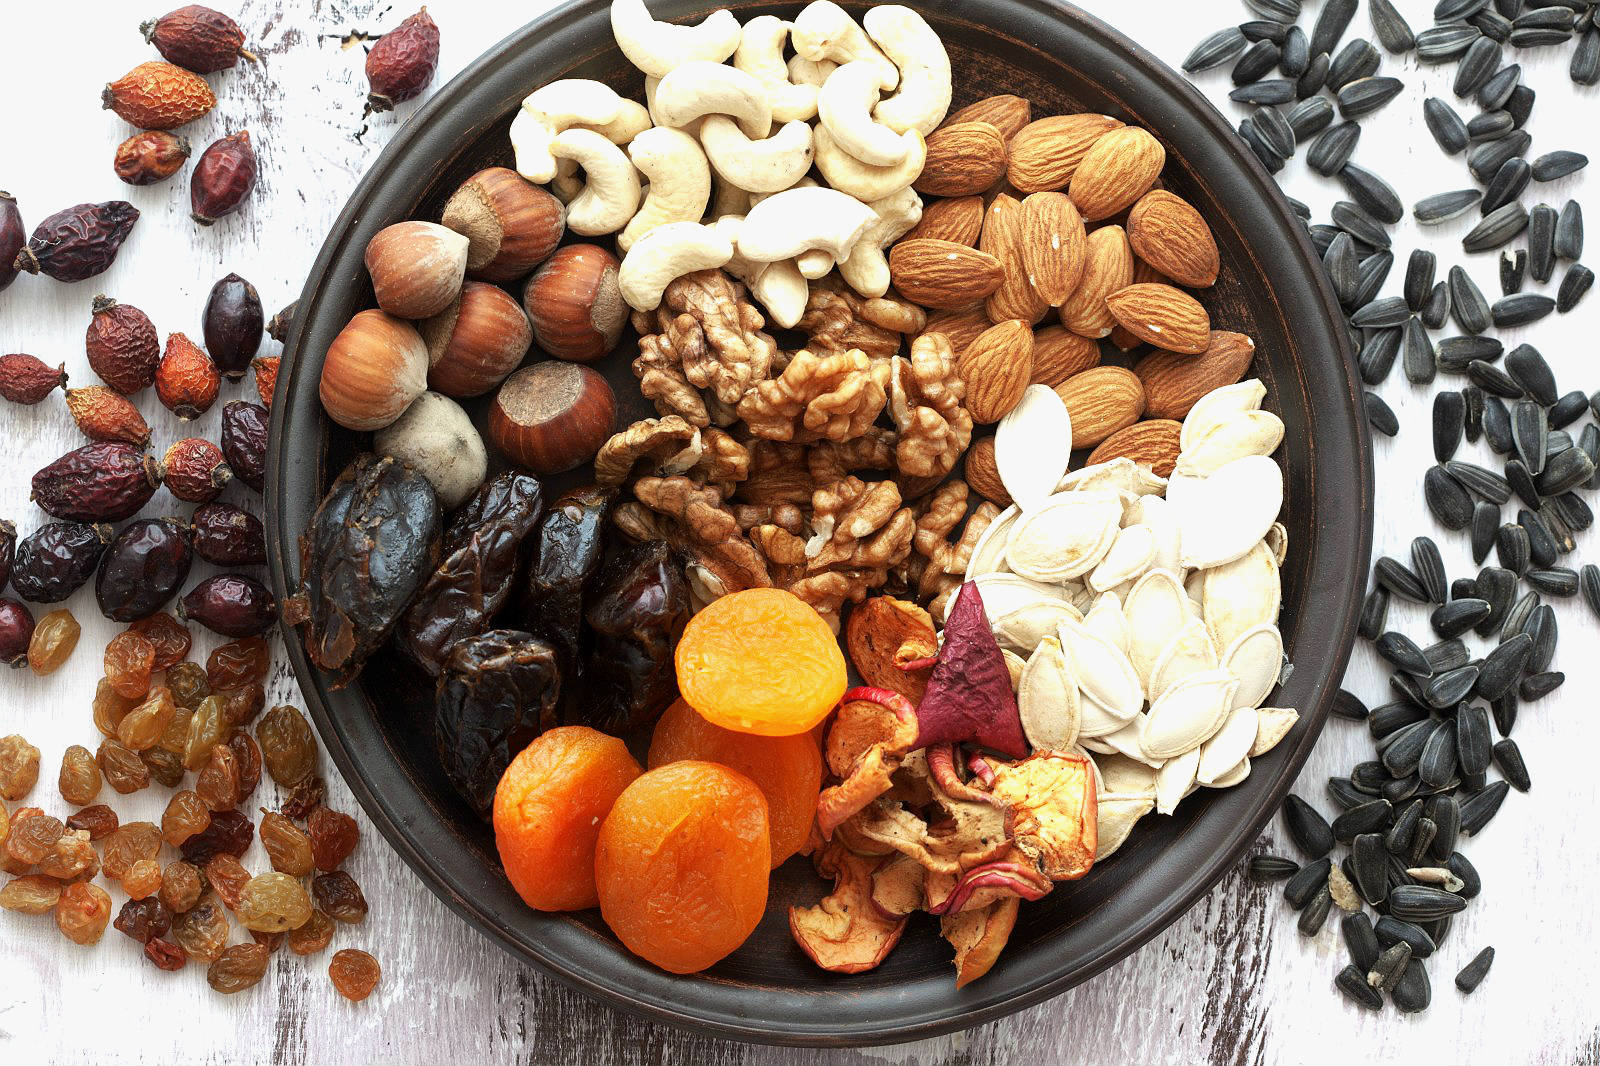 Are Dried Fruits and Nuts good for your health?